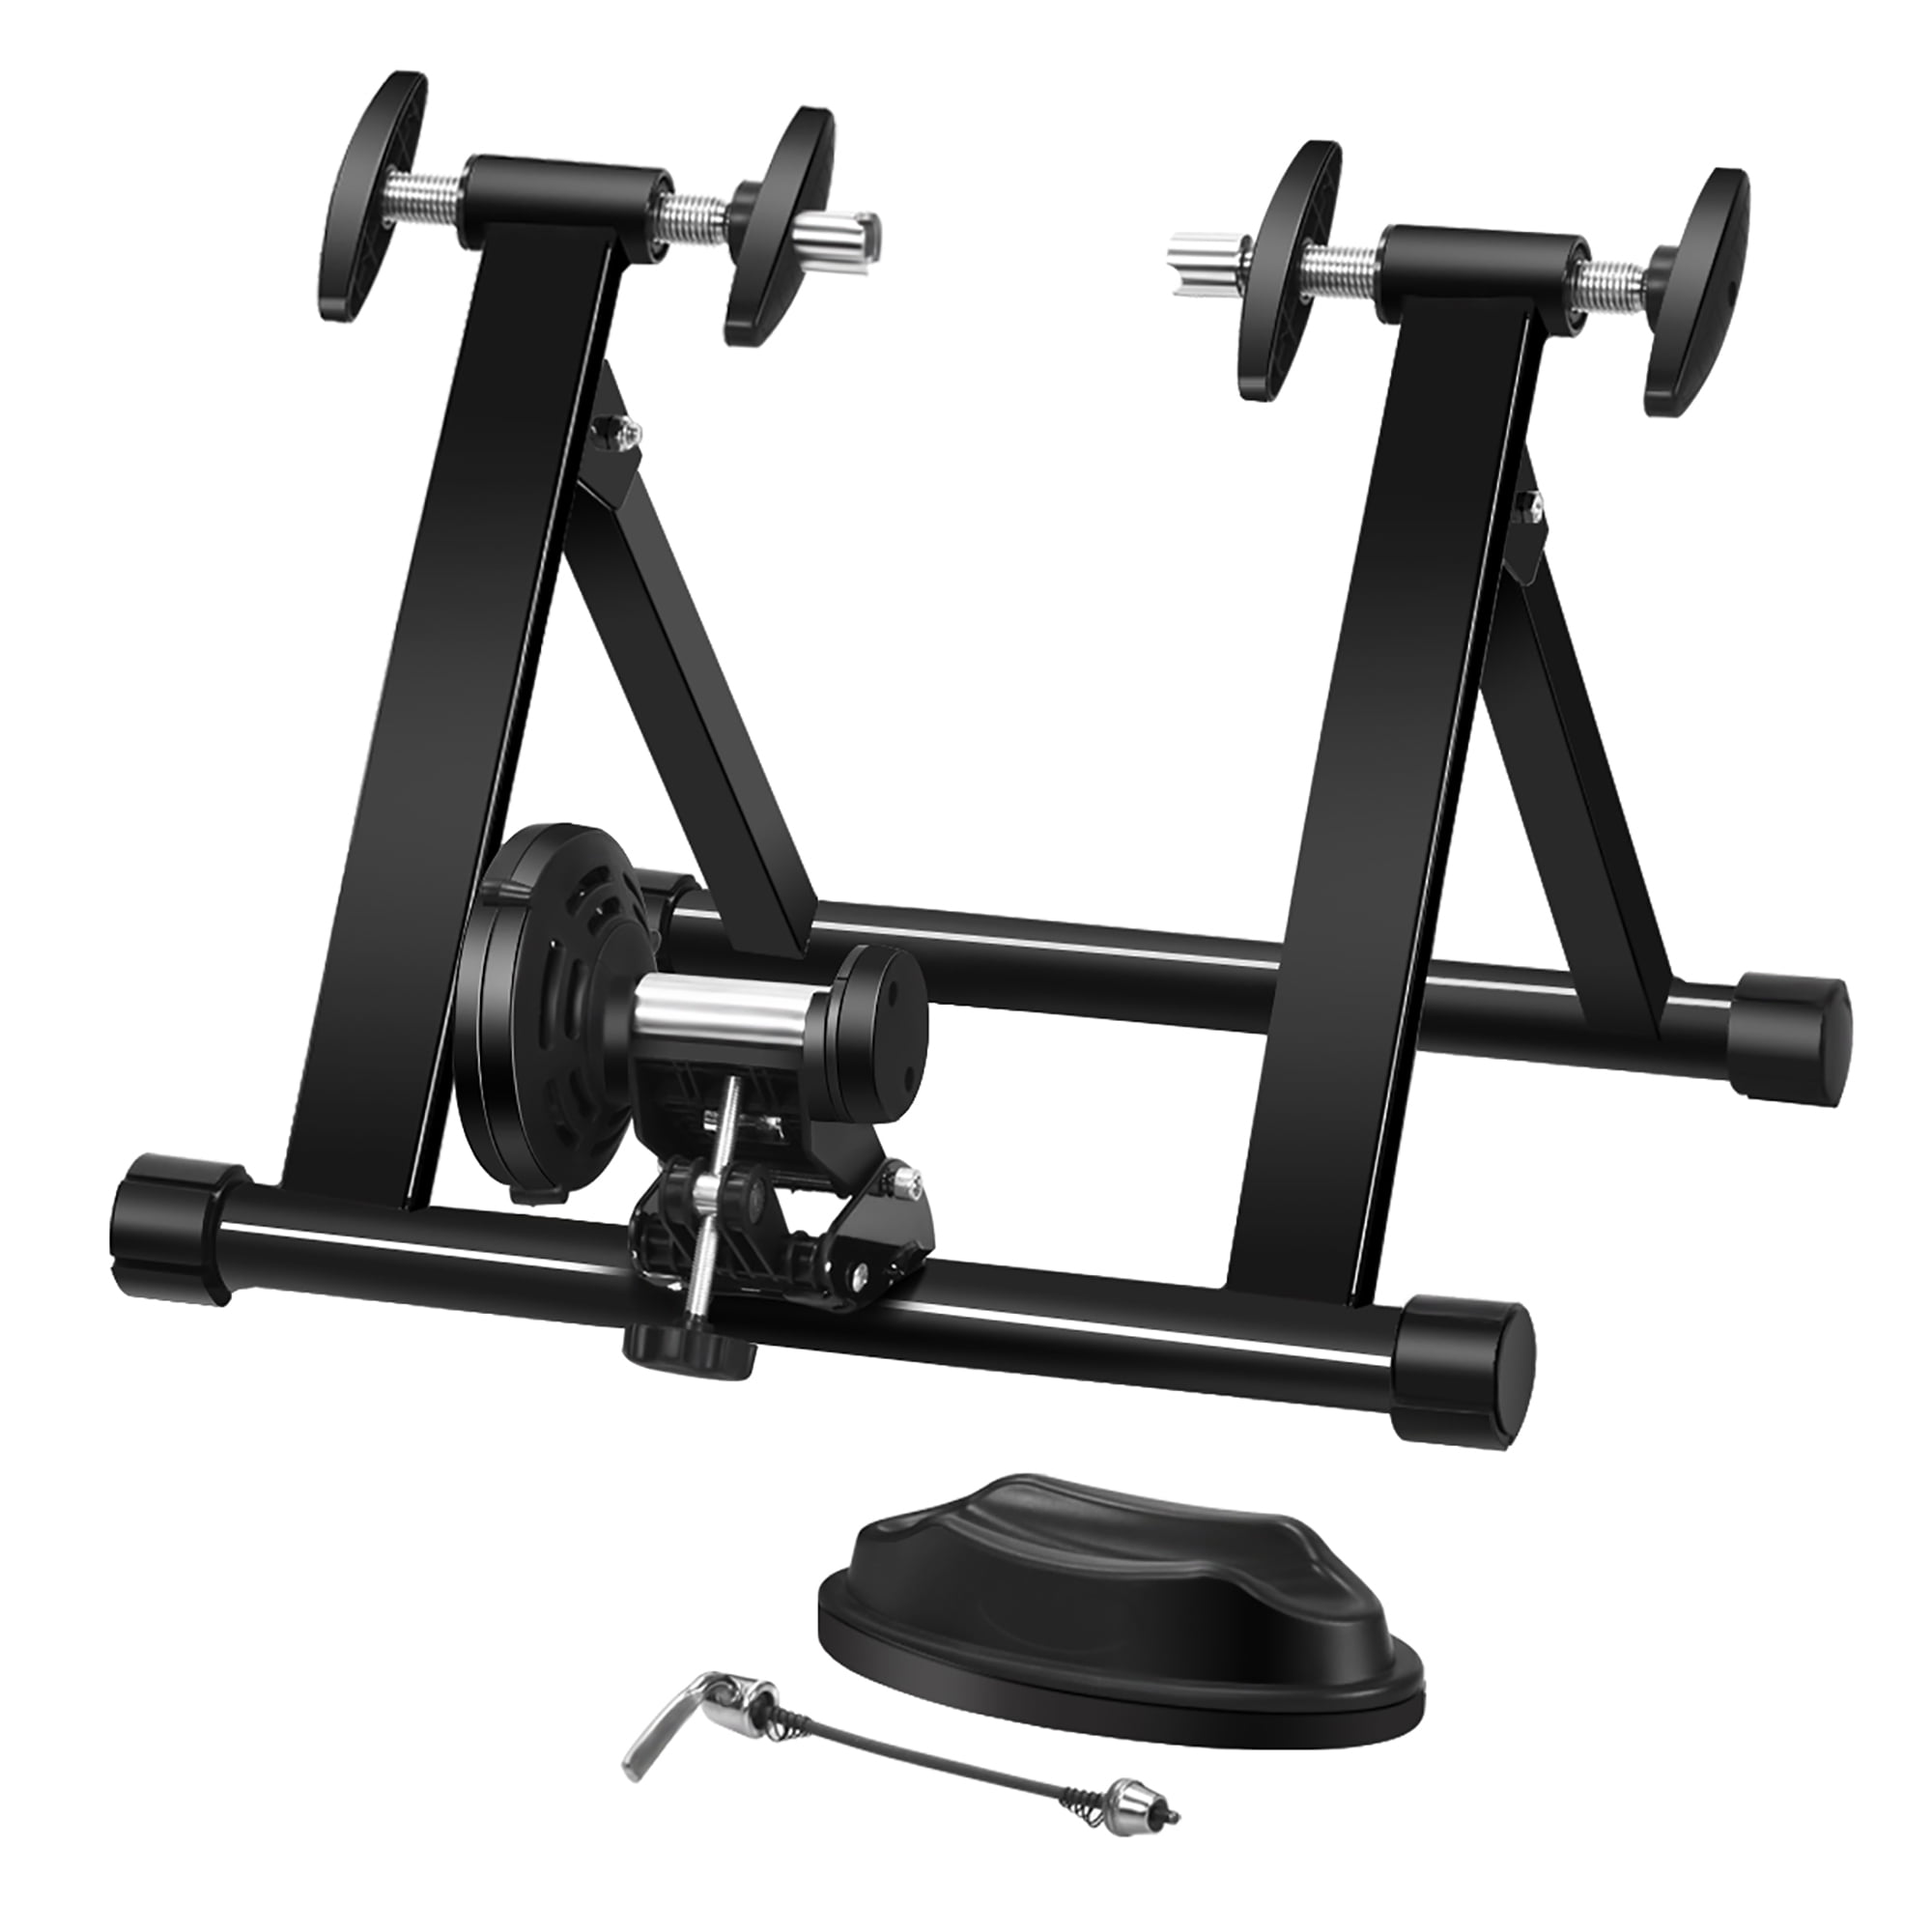 5 Level Resistance Magnetic Indoor Bicycle Bike Trainer Exercise Stand Black. 